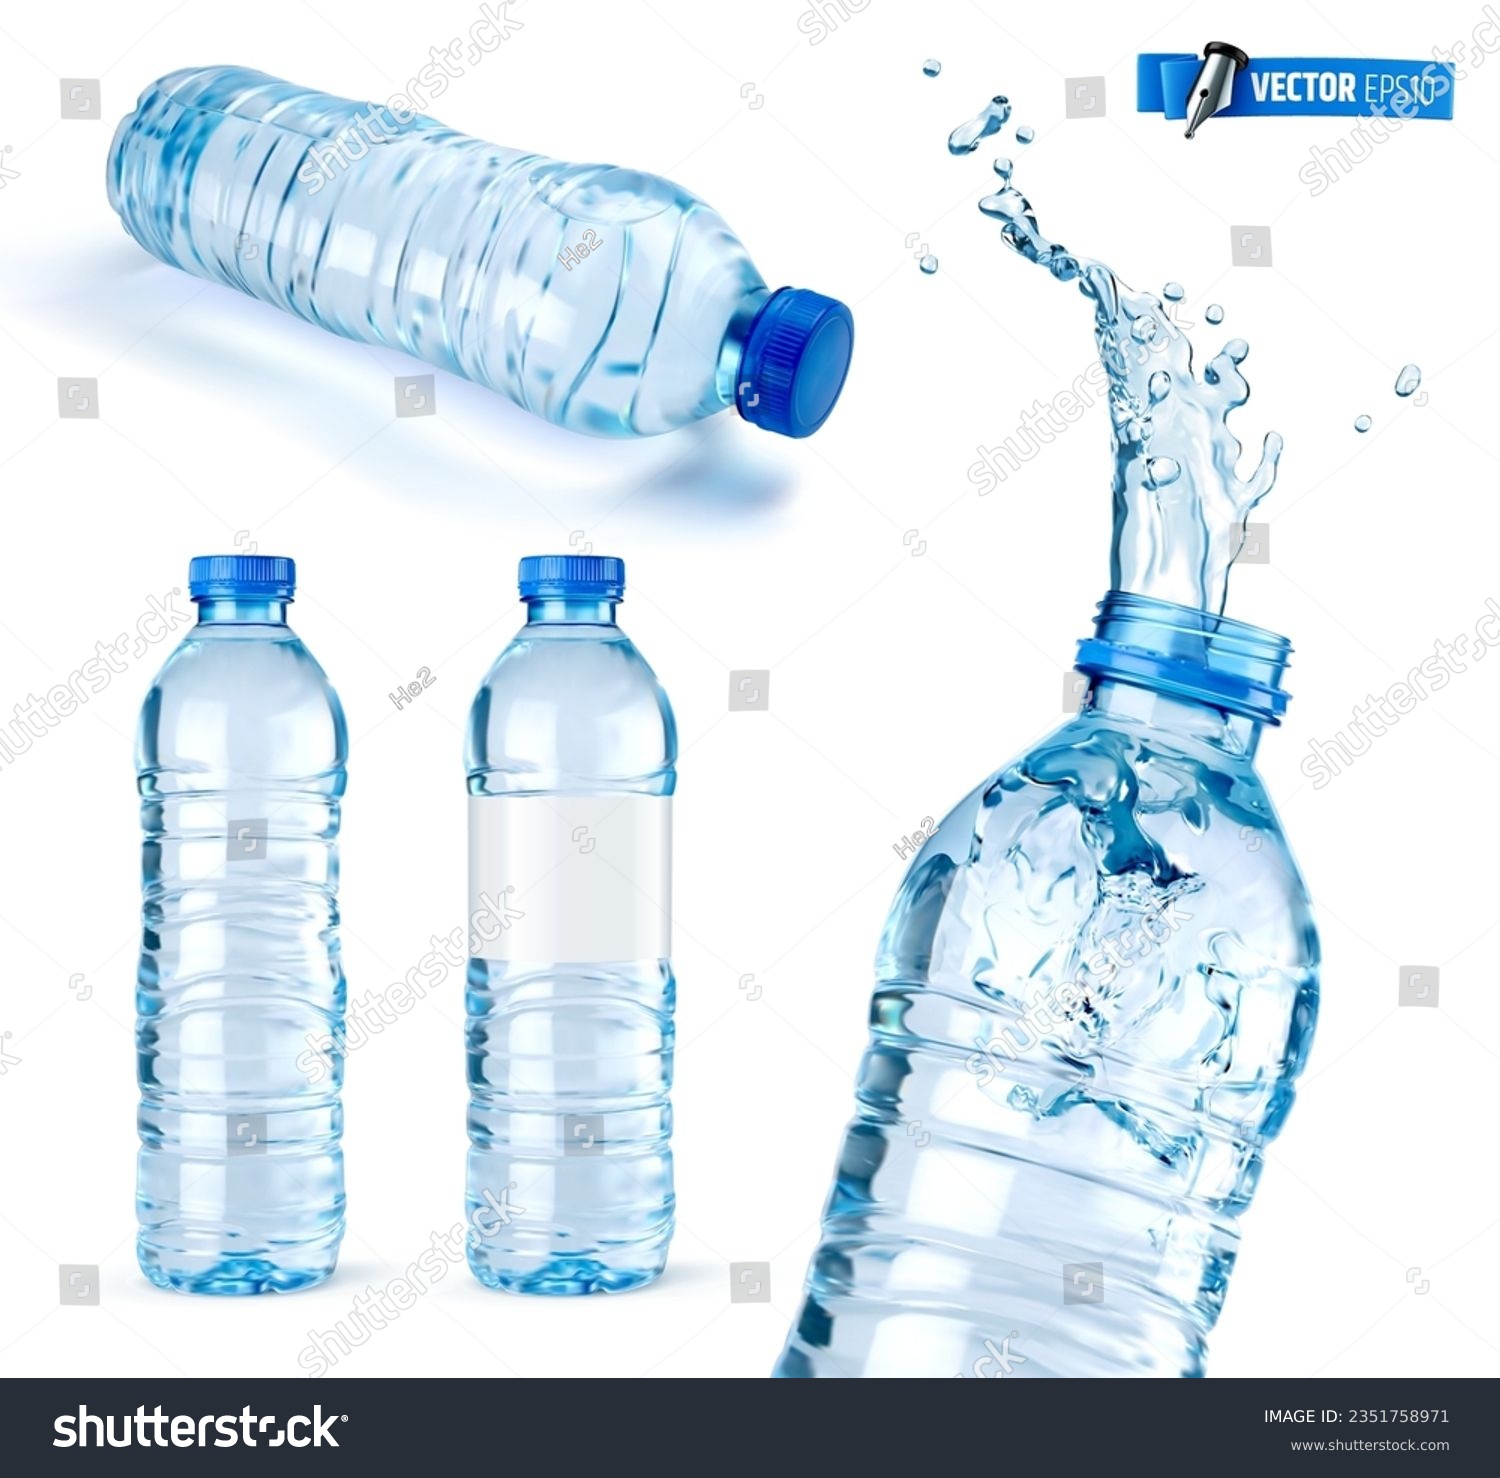 SVG of Vector realistic illustration of water bottles on a white background. svg